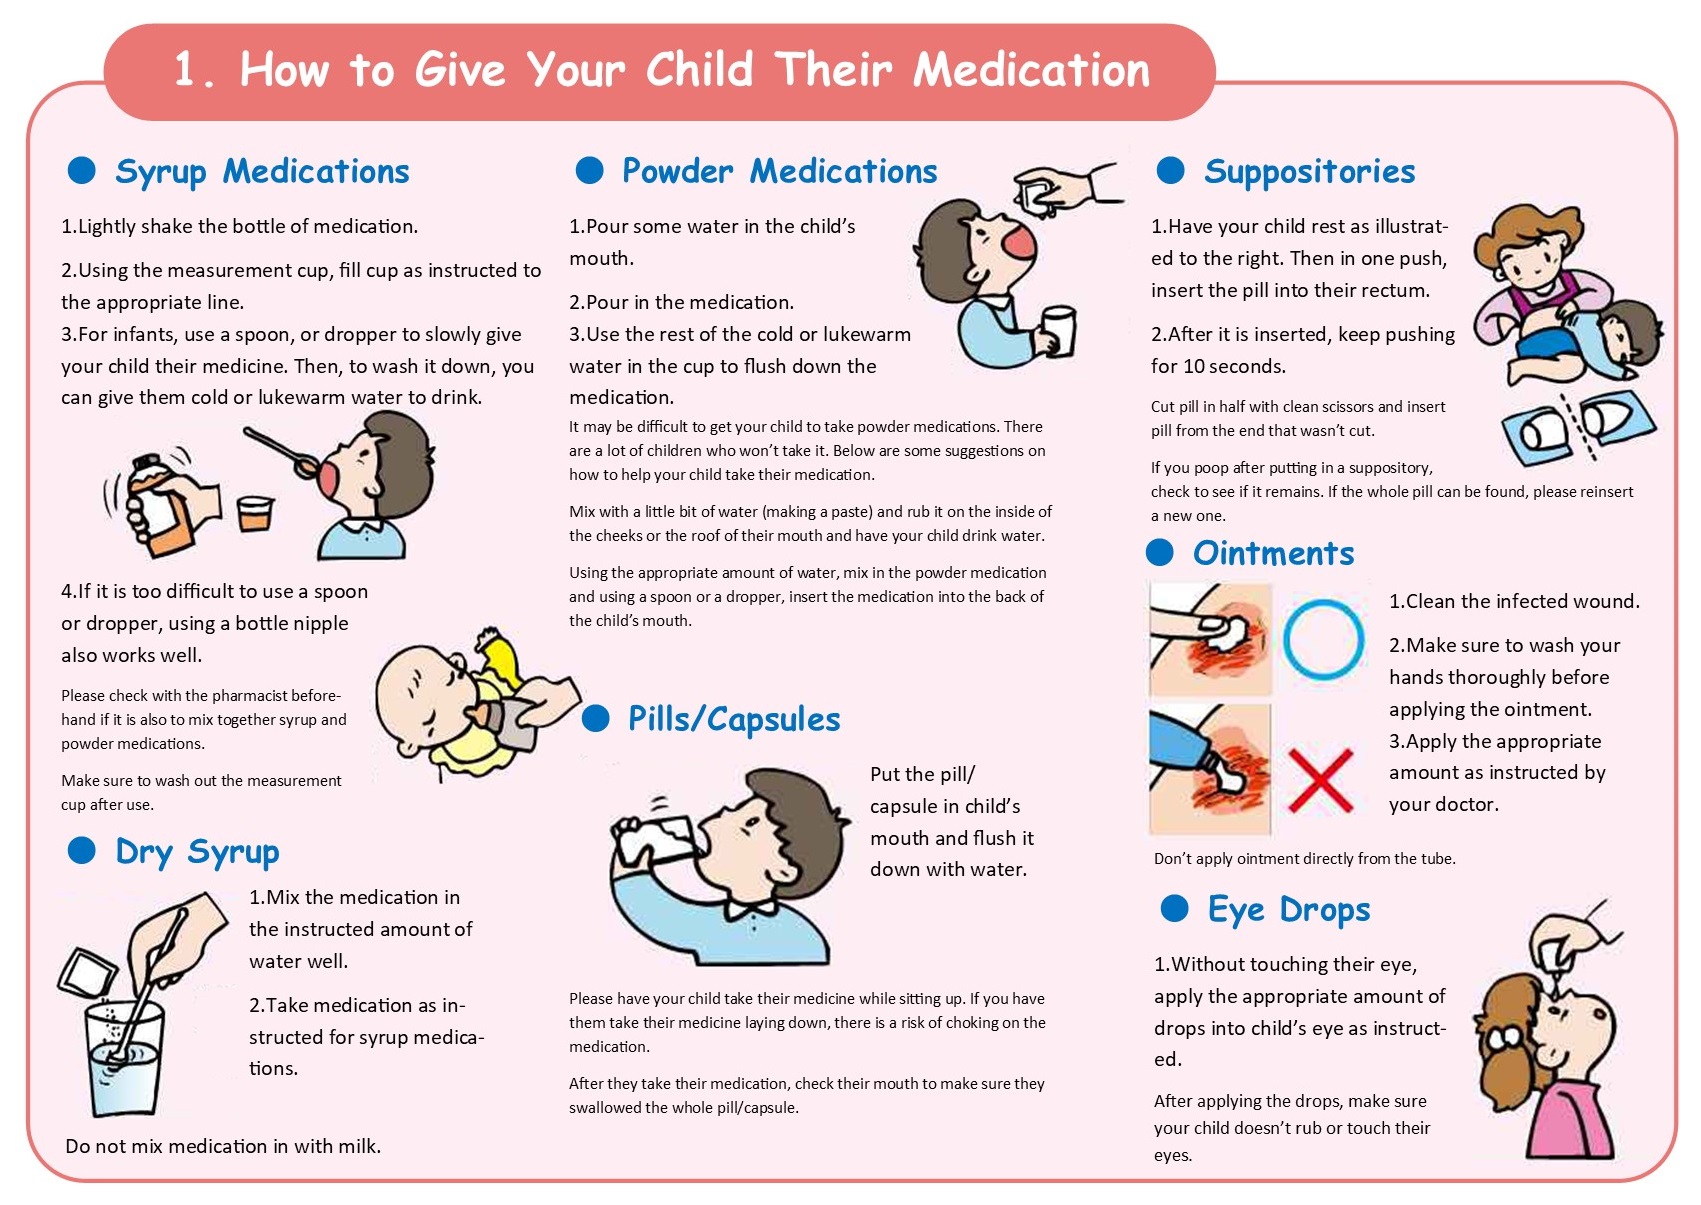 Giving your child their medicine